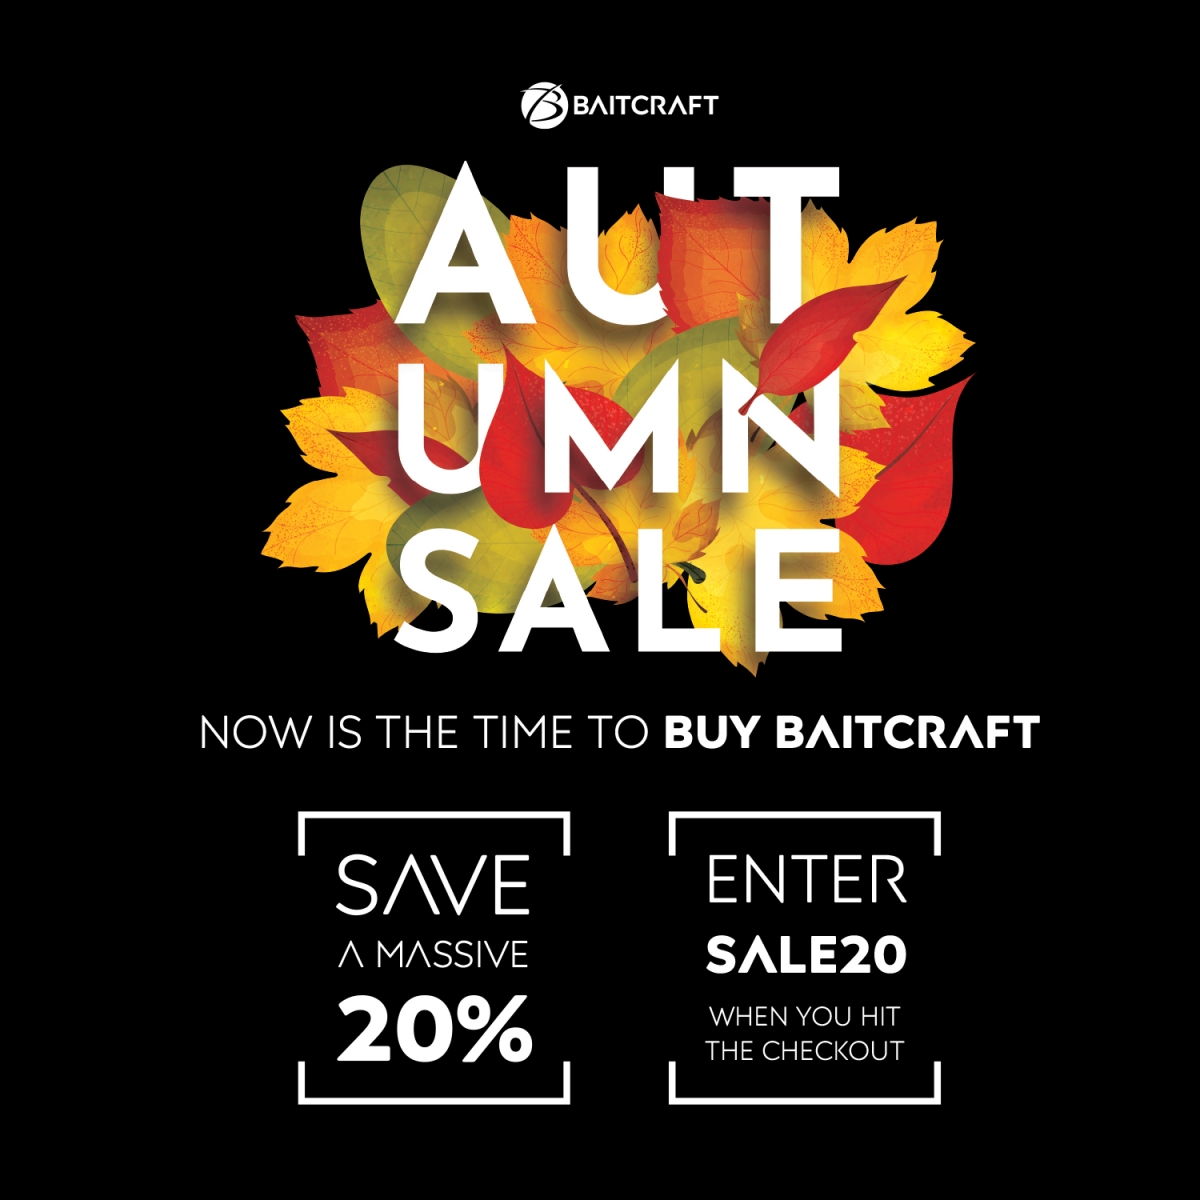 OUR AUTUMN SALE IS NOW ON LIMITED PERIOD ONLY